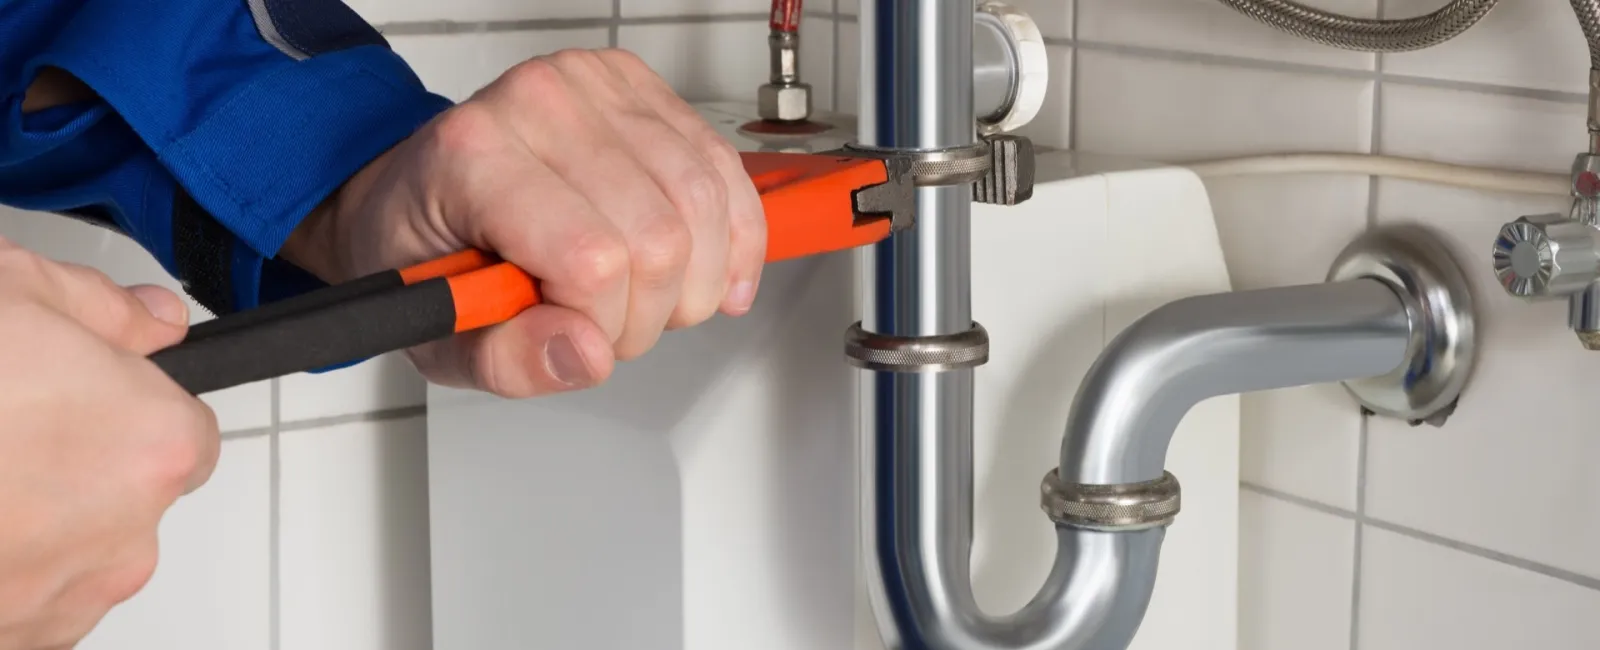 How to unclog a bathtub drain — and when to call a pro